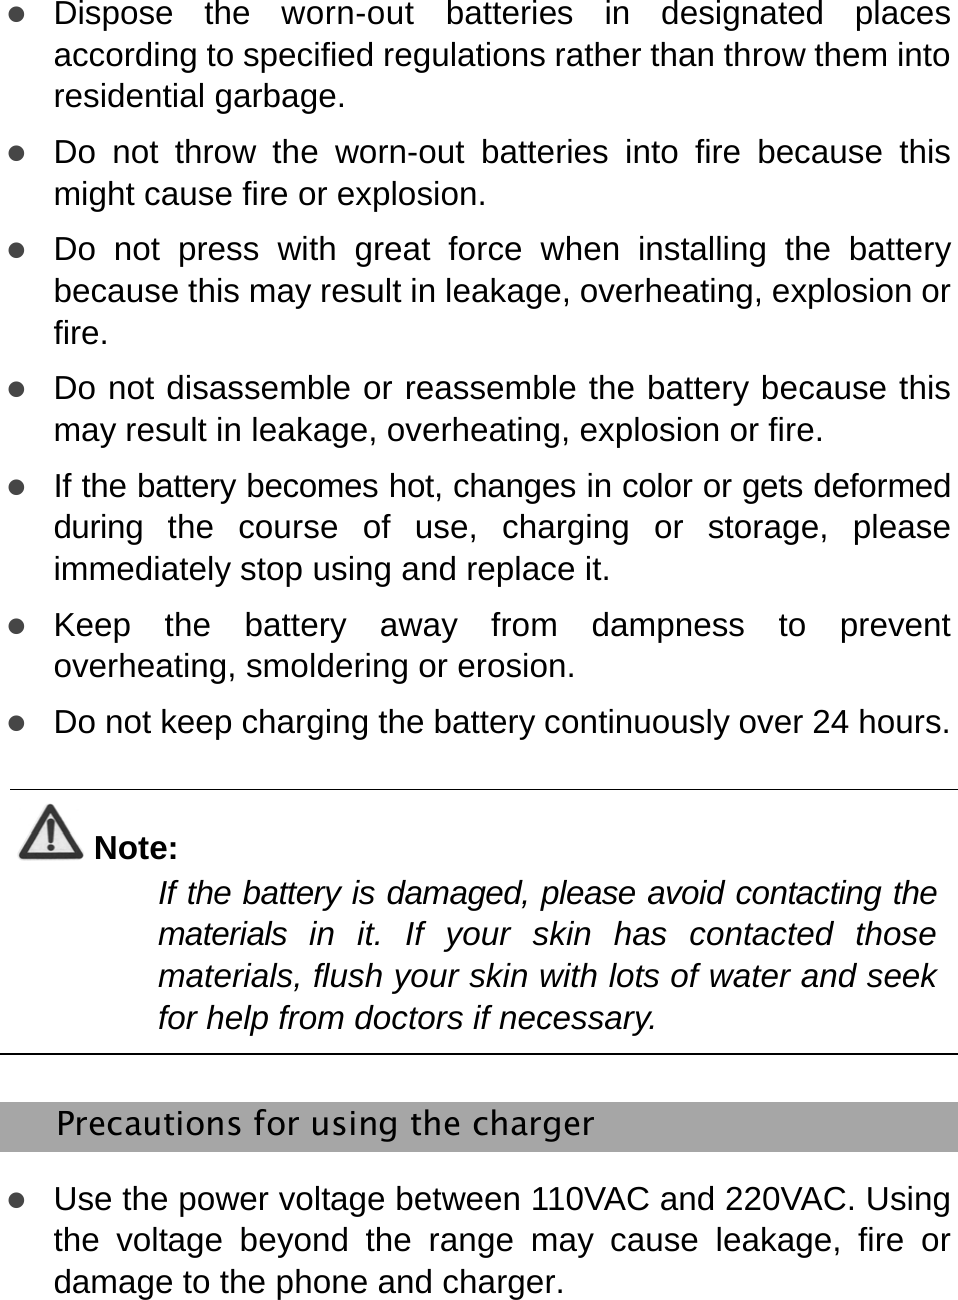   z Dispose the worn-out batteries in designated places according to specified regulations rather than throw them into residential garbage.   z Do not throw the worn-out batteries into fire because this might cause fire or explosion. z Do not press with great force when installing the battery because this may result in leakage, overheating, explosion or fire.  z Do not disassemble or reassemble the battery because this may result in leakage, overheating, explosion or fire. z If the battery becomes hot, changes in color or gets deformed during the course of use, charging or storage, please immediately stop using and replace it. z Keep the battery away from dampness to prevent overheating, smoldering or erosion. z Do not keep charging the battery continuously over 24 hours.  Note: If the battery is damaged, please avoid contacting the materials in it. If your skin has contacted those materials, flush your skin with lots of water and seek for help from doctors if necessary.    Precautions for using the charger z Use the power voltage between 110VAC and 220VAC. Using the voltage beyond the range may cause leakage, fire or damage to the phone and charger. 